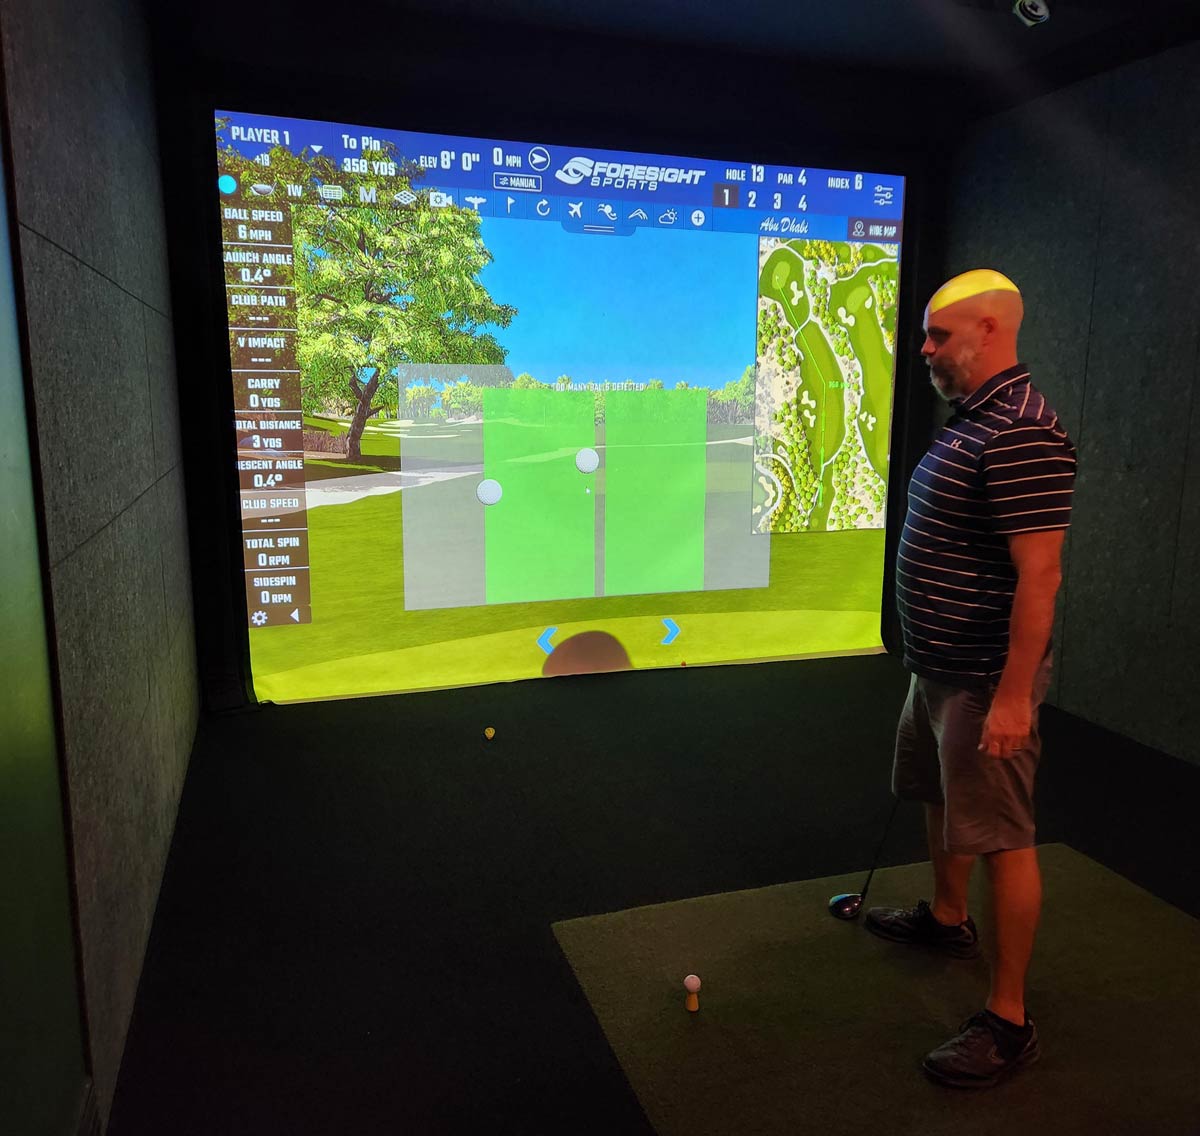 This golf simulator recognizes my bald head as another golf ball